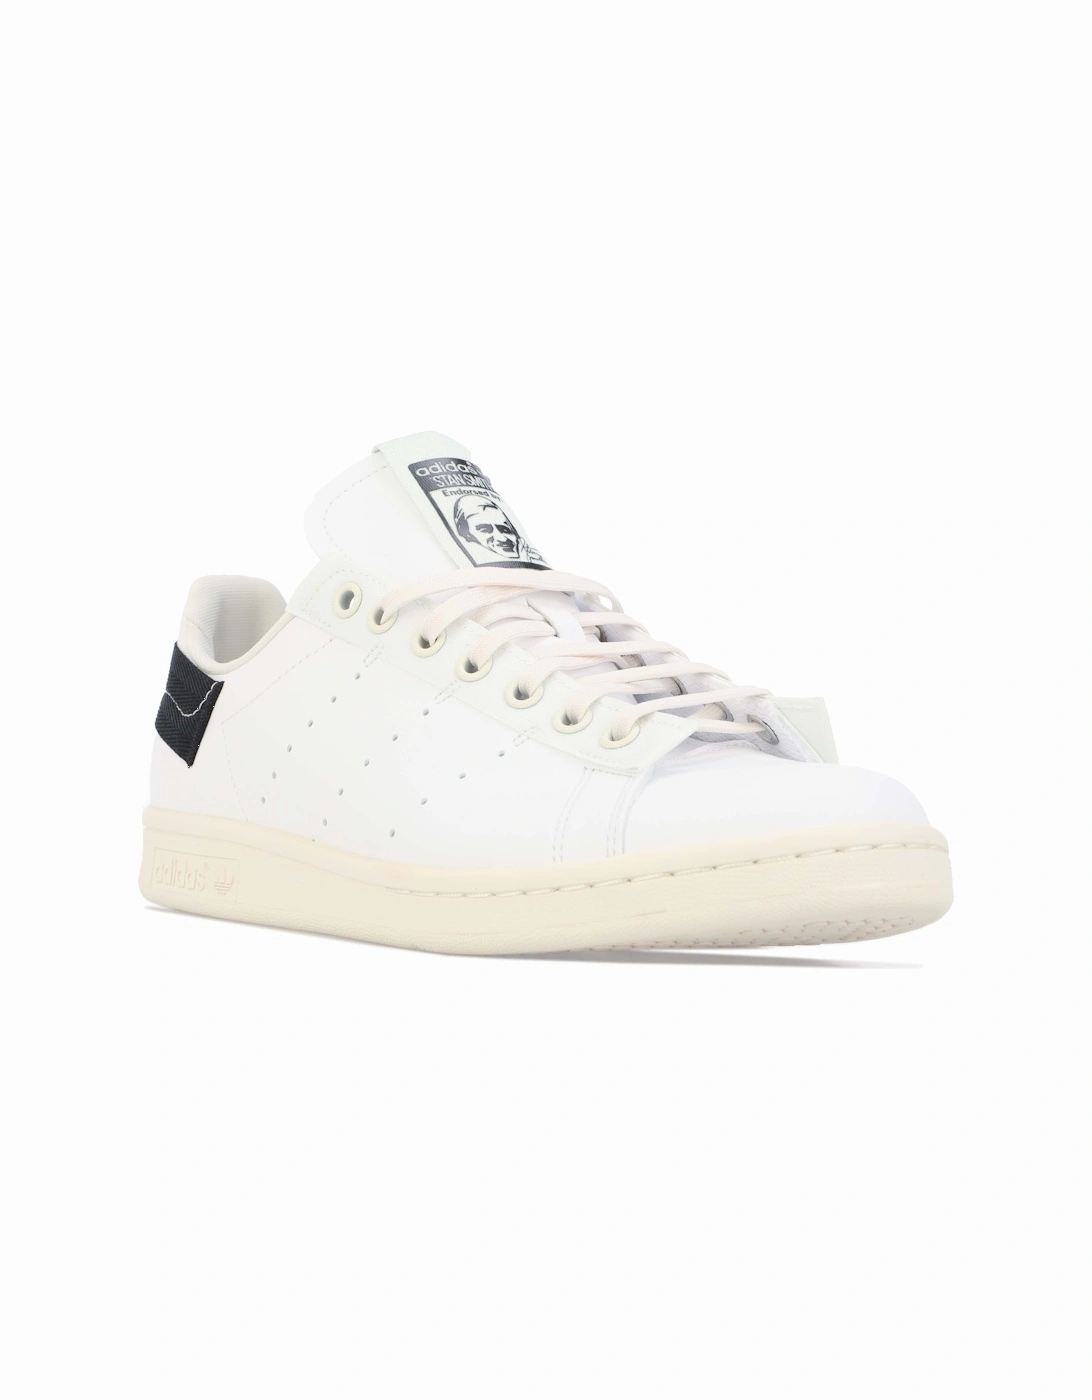 Men's Mens Stan Smith Parley Trainers - White - Size: 7.5